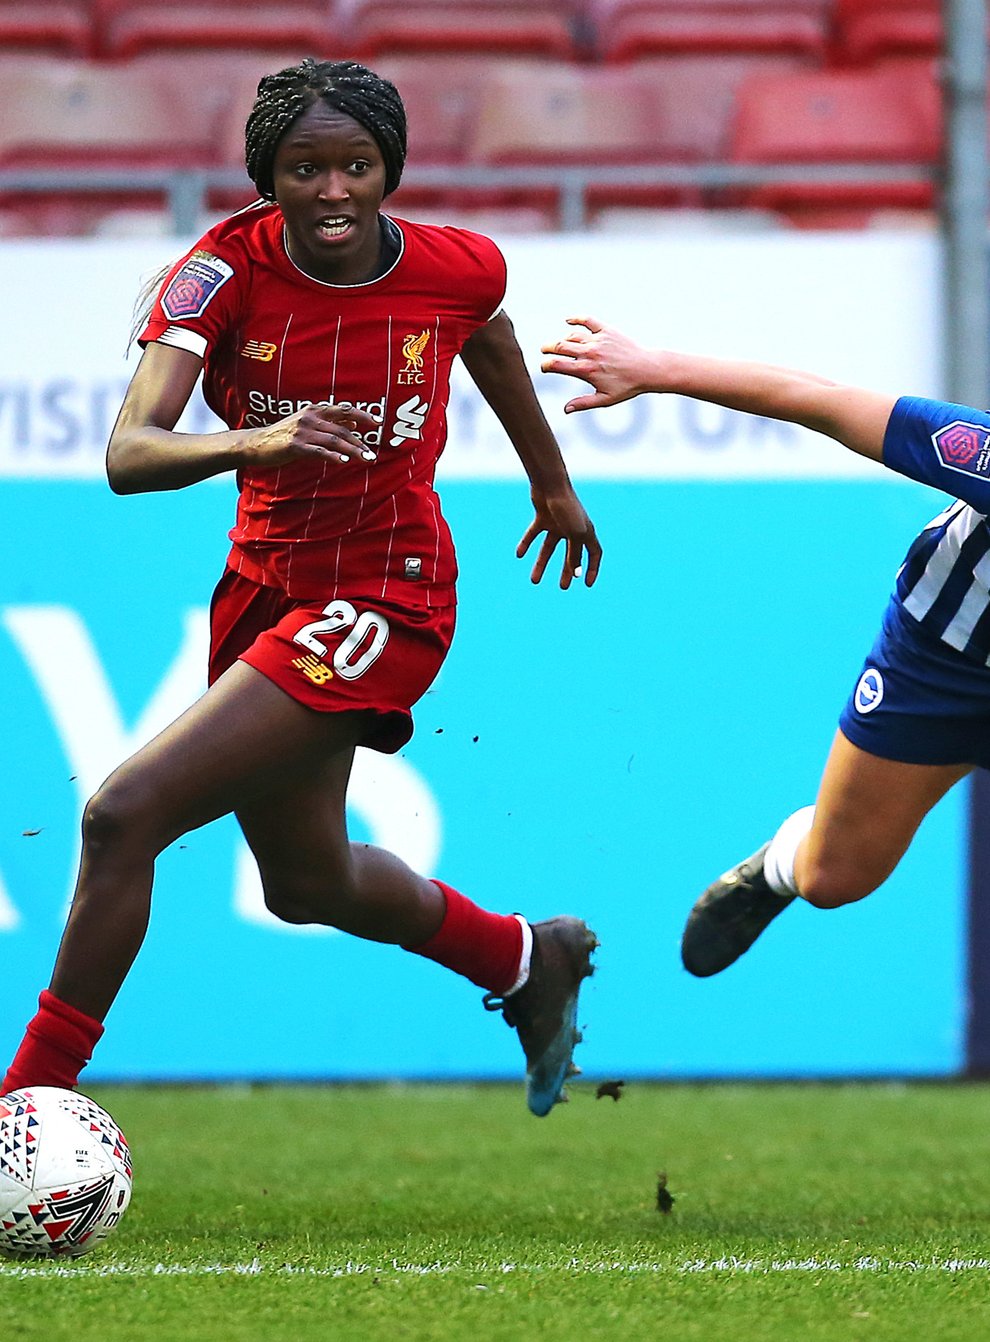 Babajide has been given her first England call-up